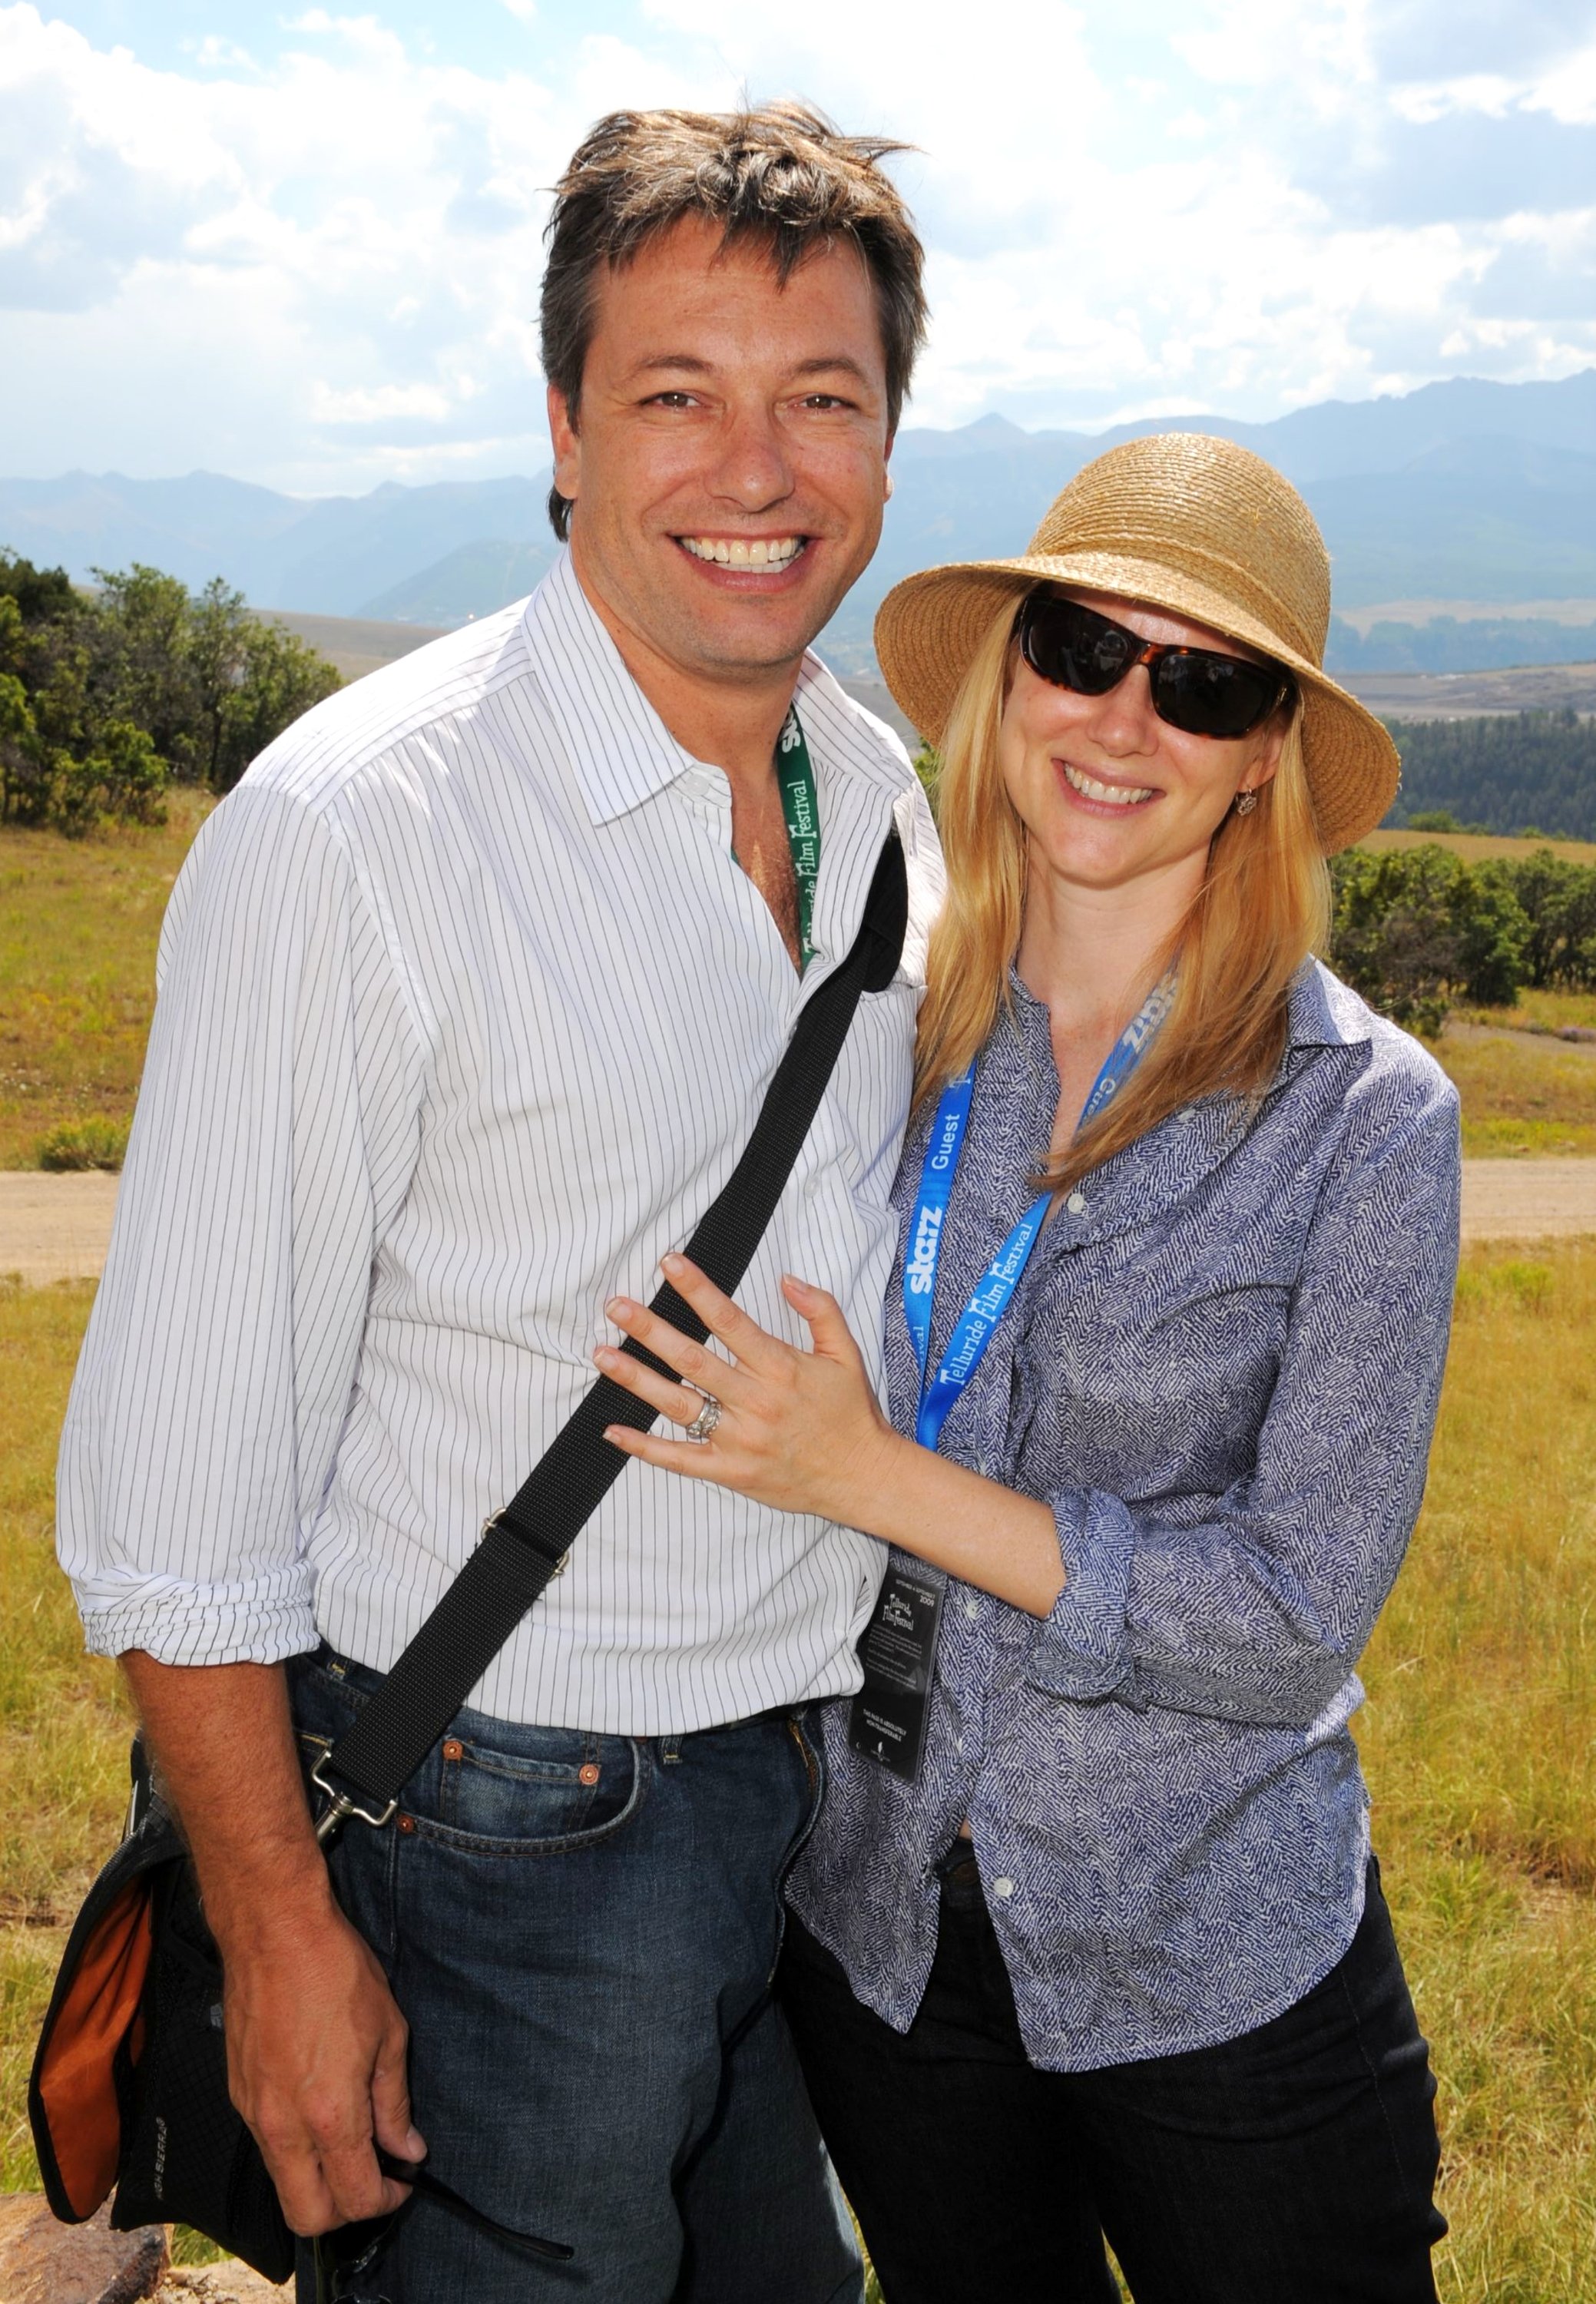 Laura Linney and Marc Schauer during the Patronâ Brunch during the 36th Telluride Film Festival at the Opera House on September 4, 2009 in Telluride, Colorado. / Source: Getty Images